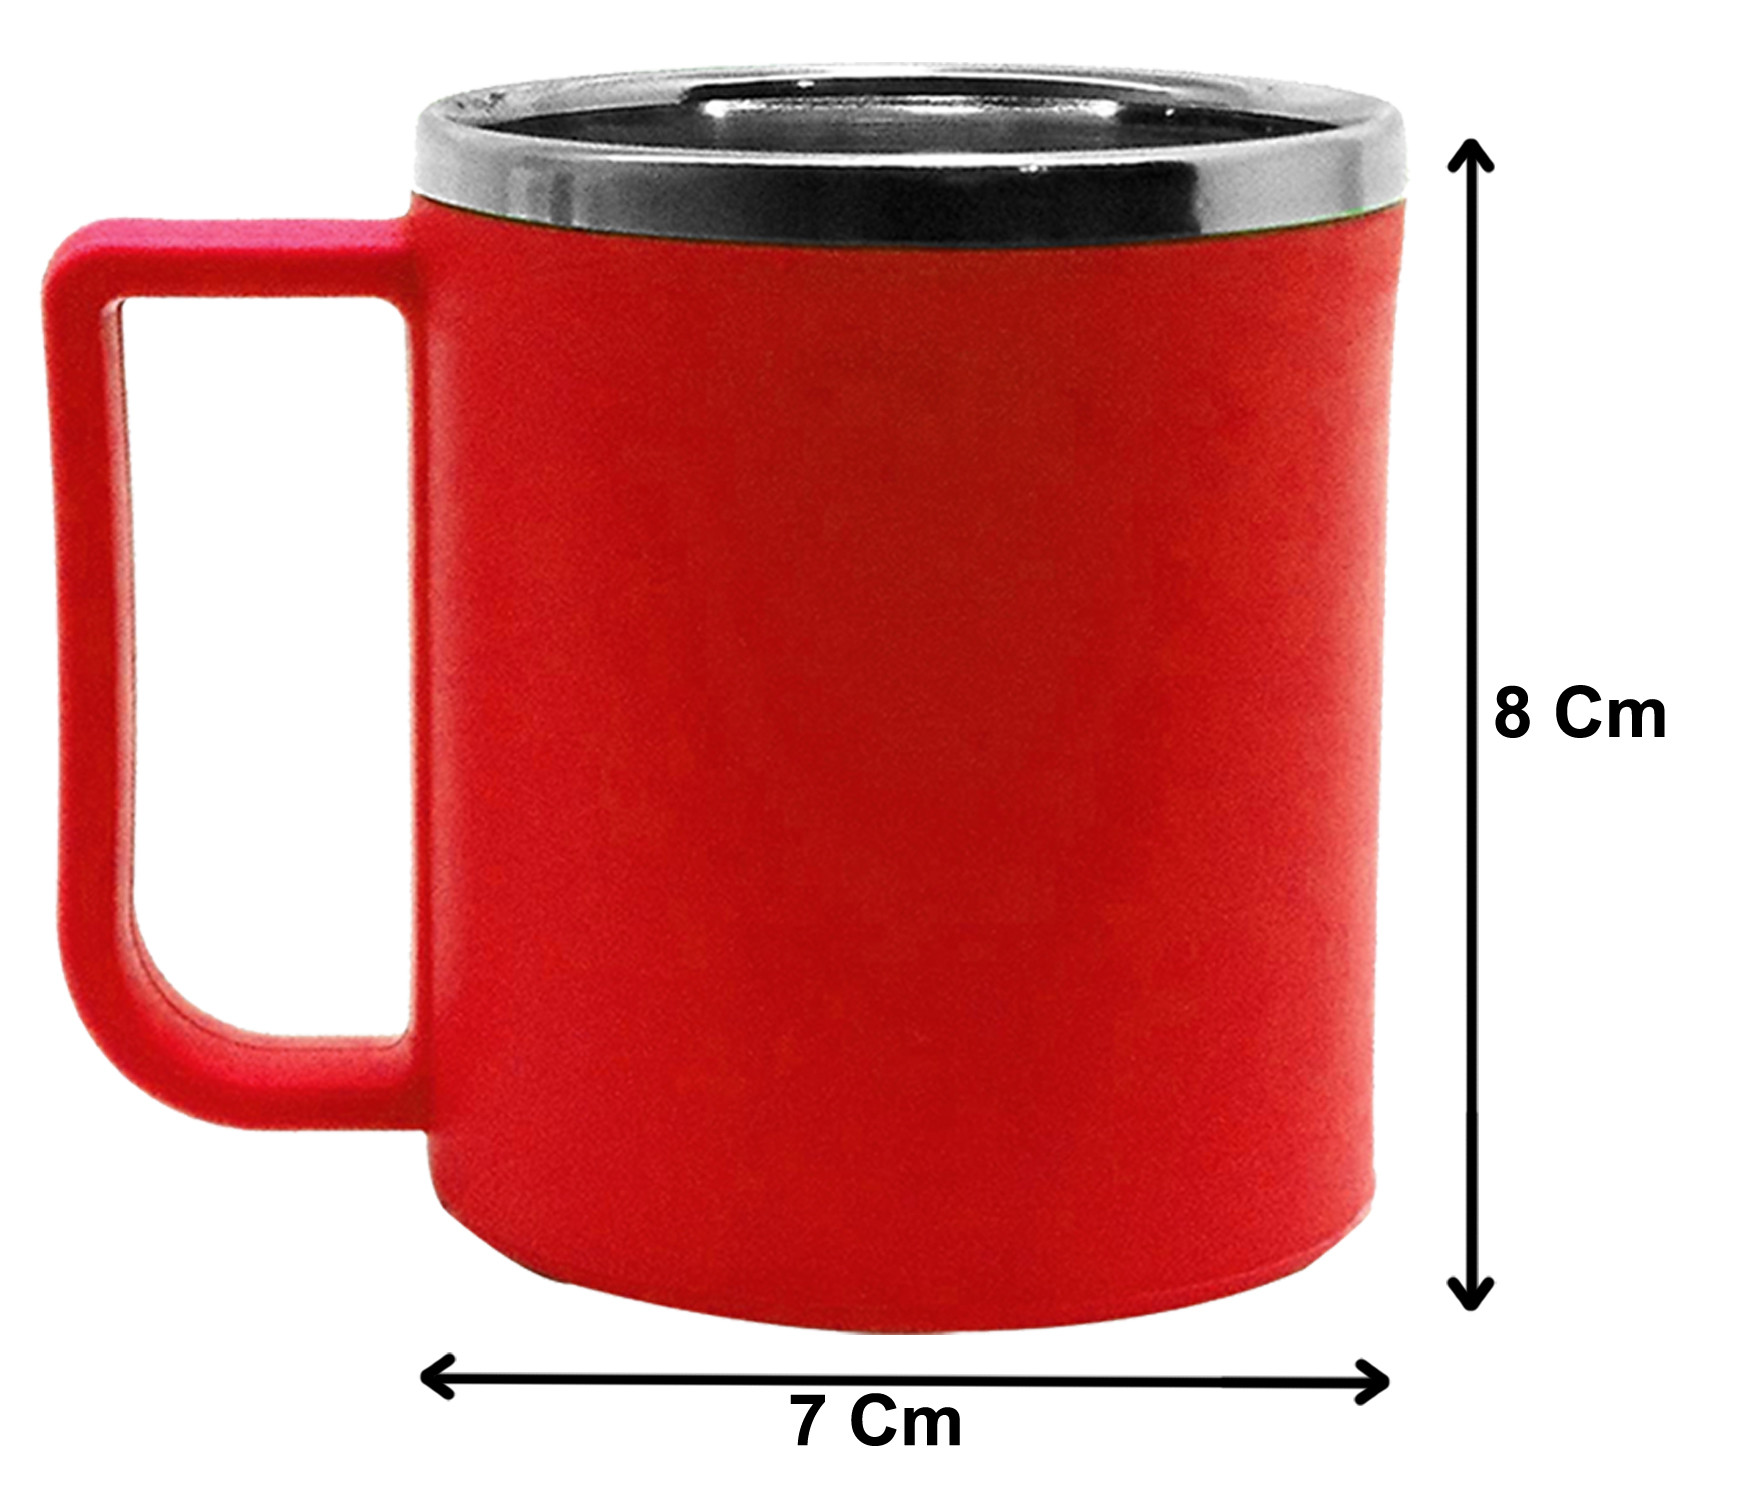 Kuber Industries Plastic Steel Cups for Coffee Tea Cocoa, Camping Mugs with Handle, Portable & Easy Clean (Red)